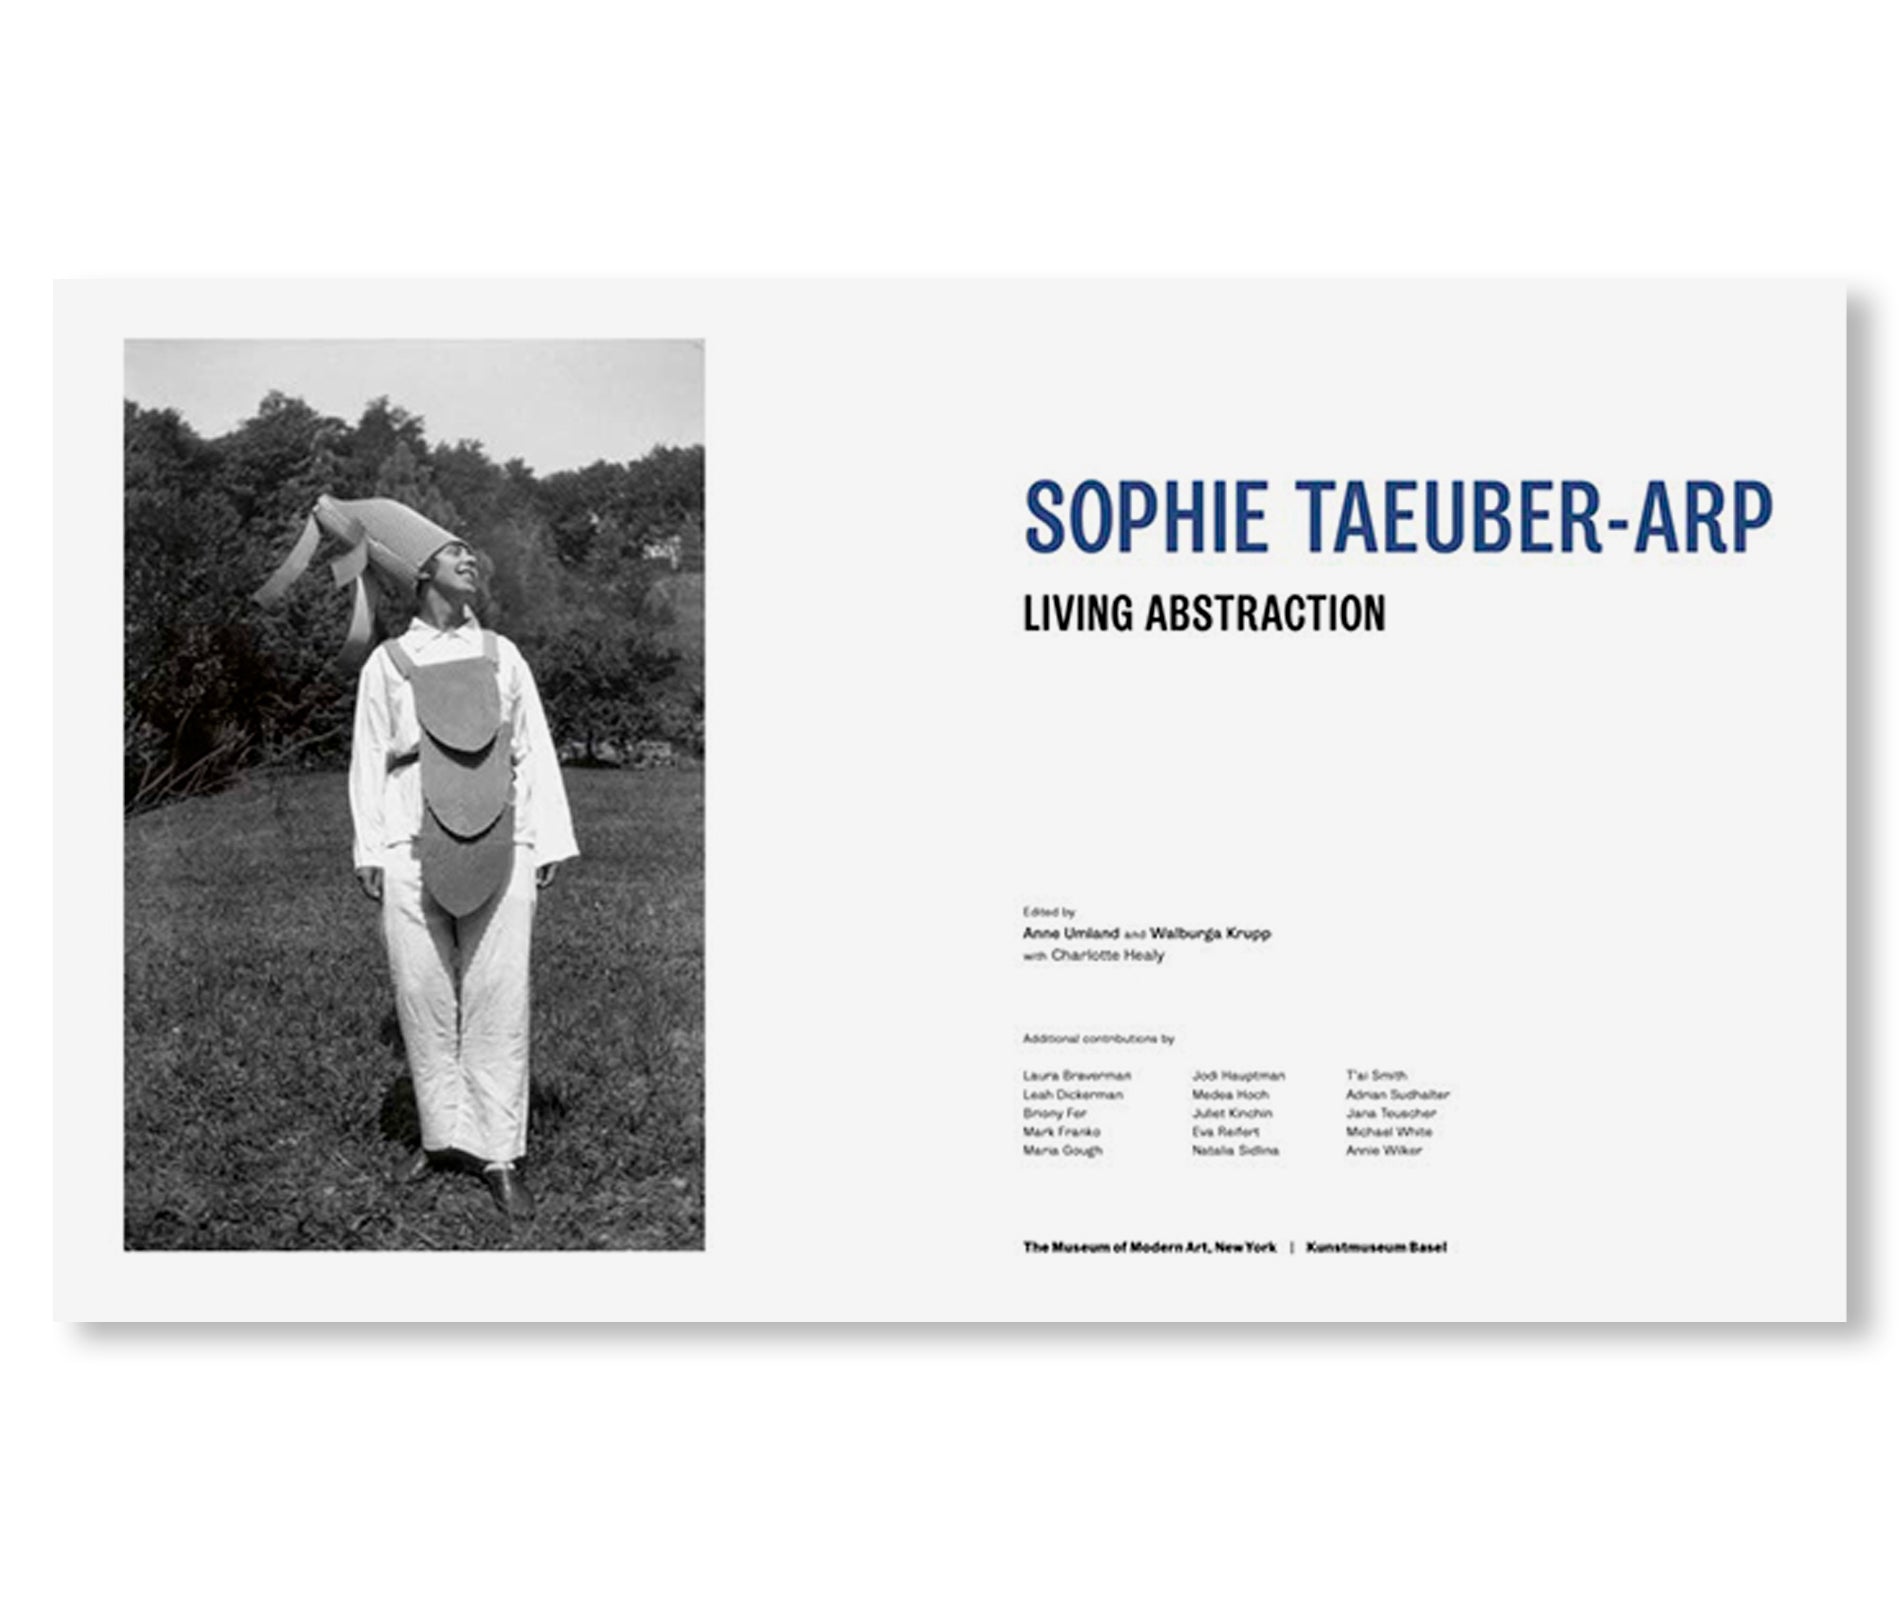 LIVING ABSTRACTION by Sophie Taeuber-Arp